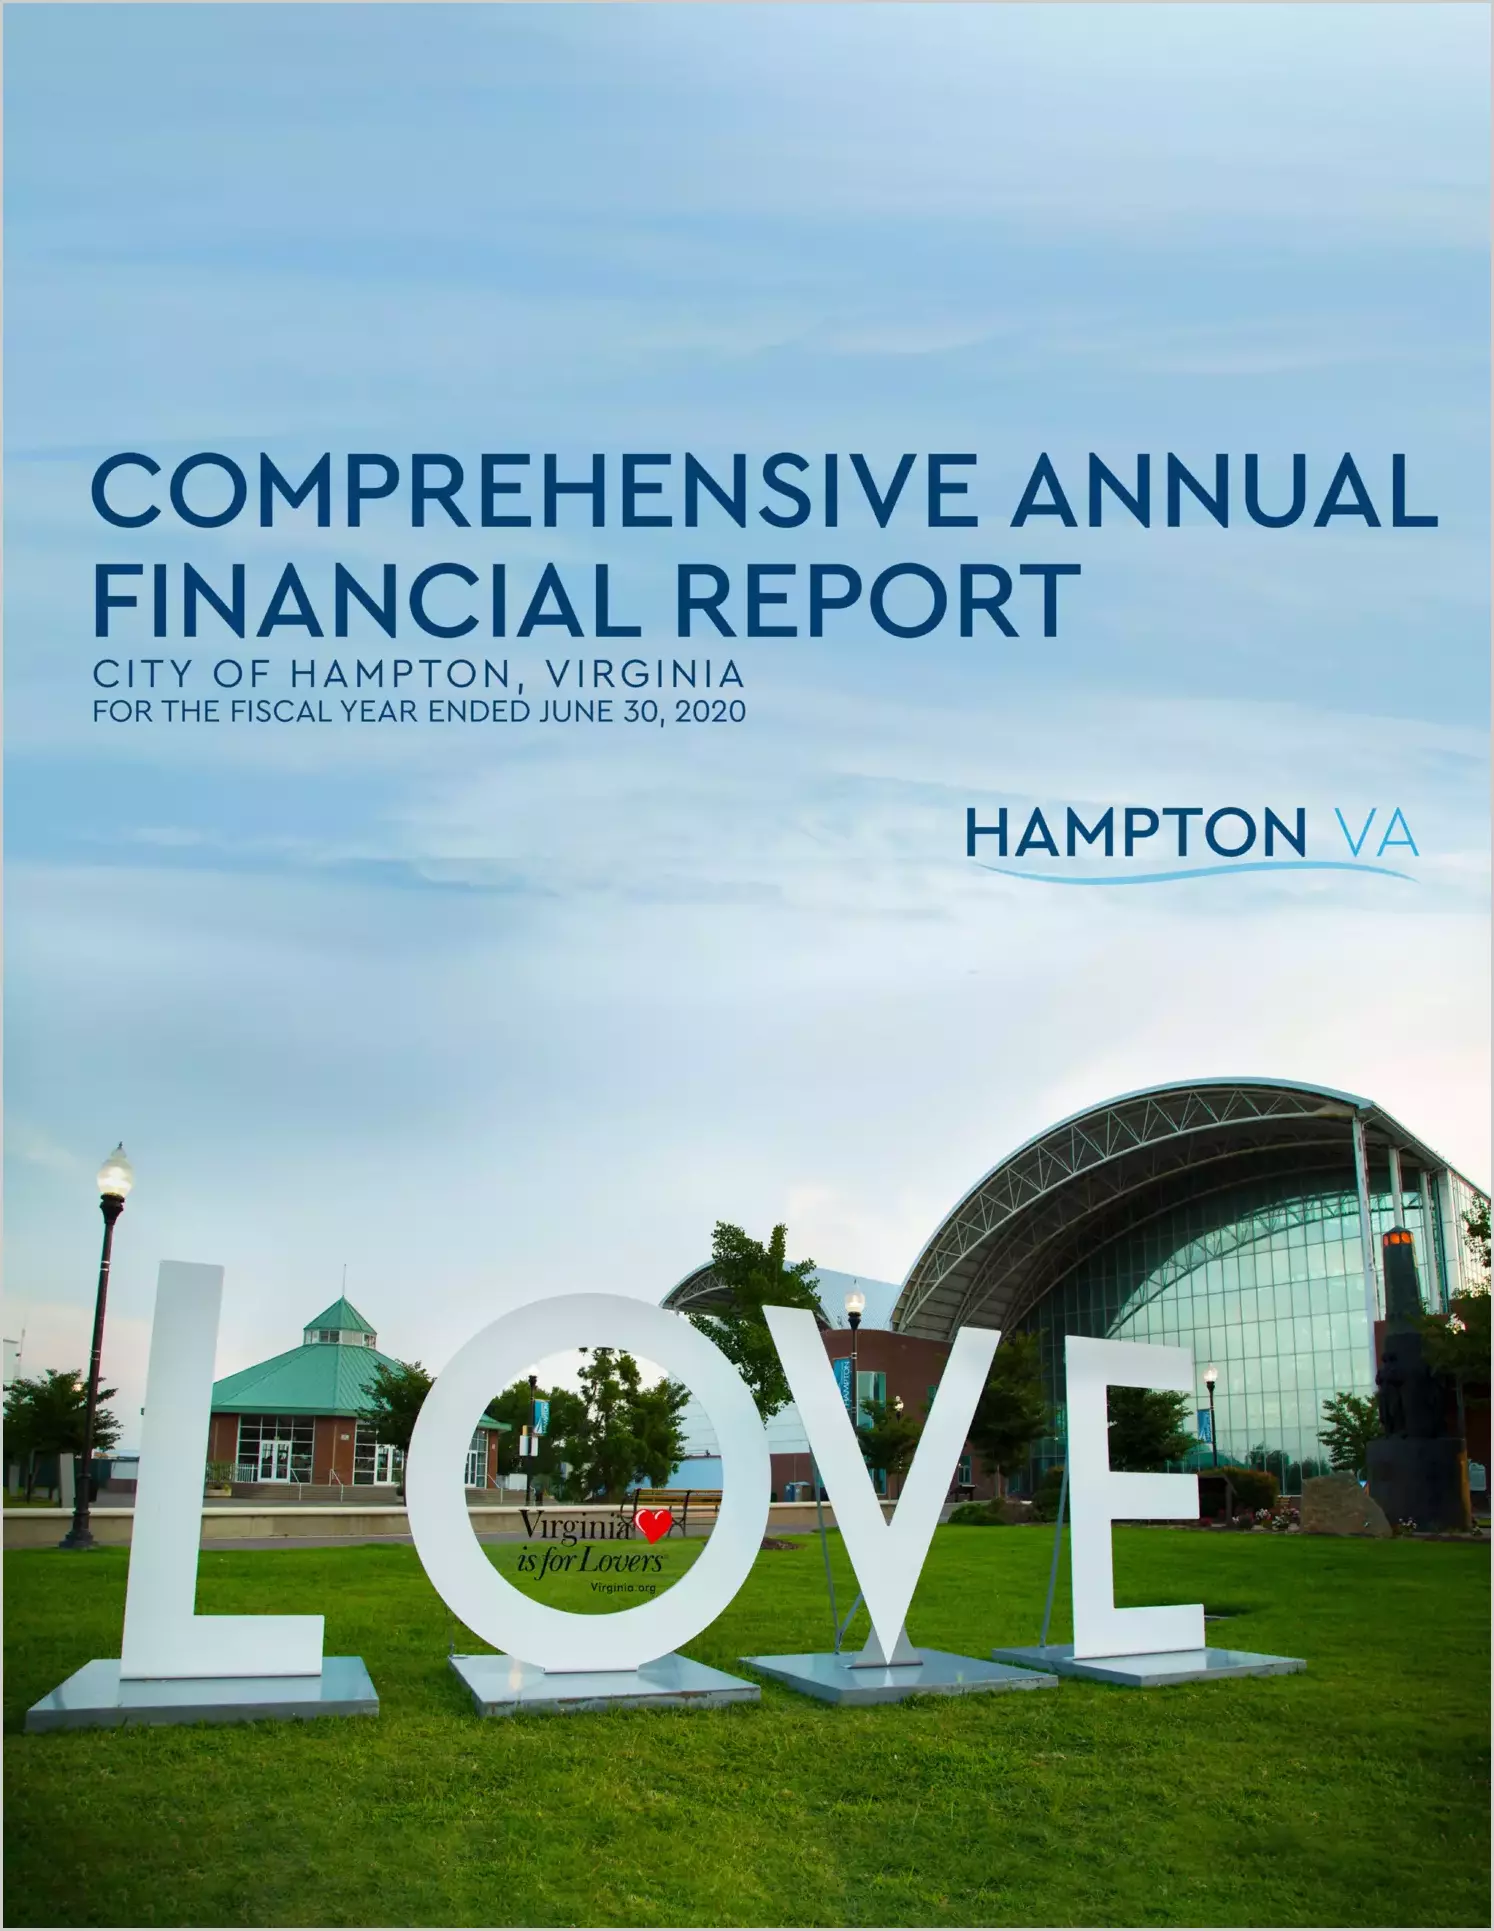 2020 Annual Financial Report for City of Hampton